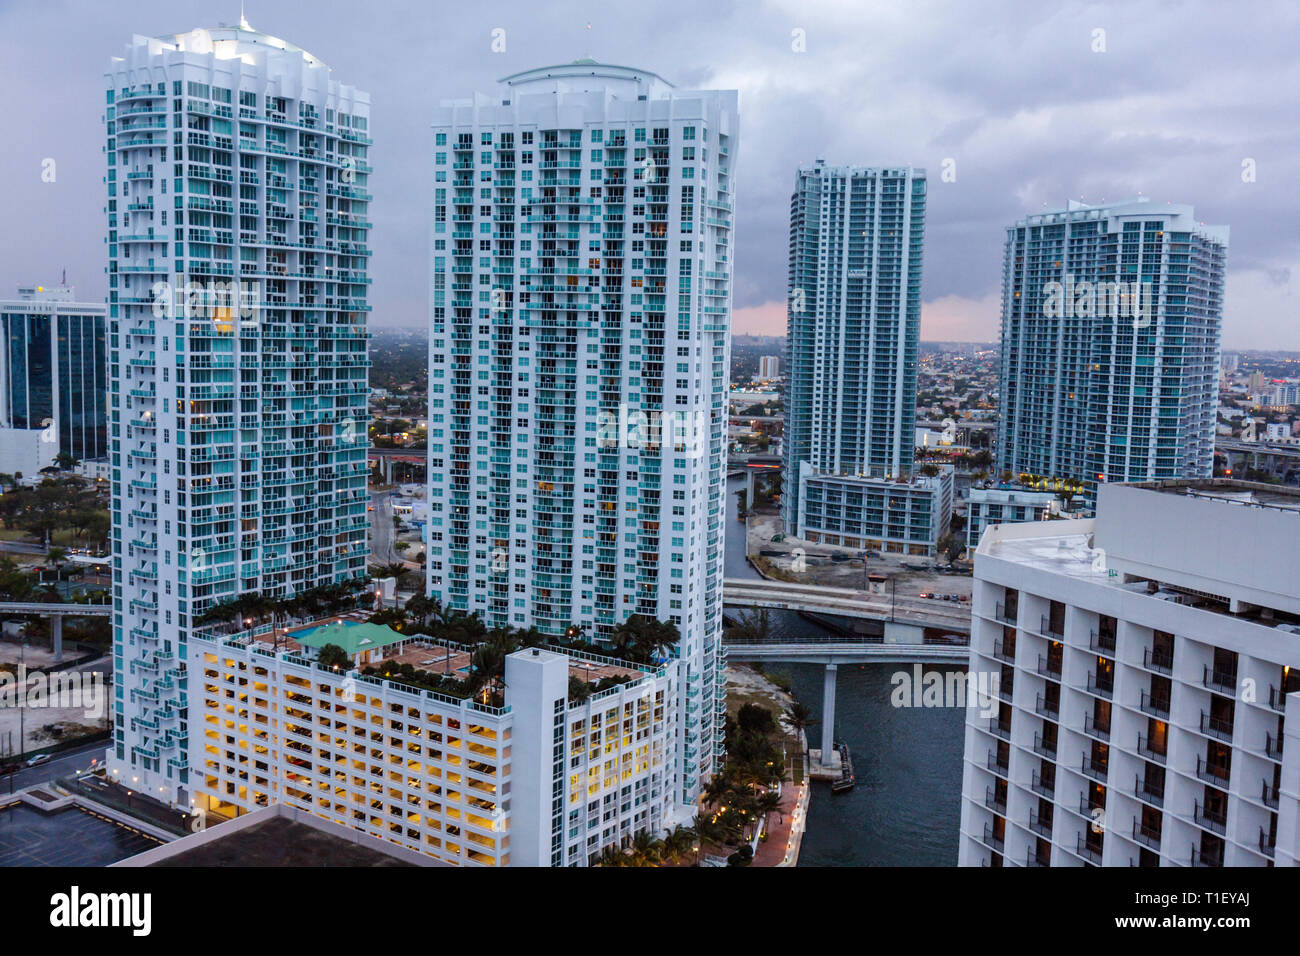 Miami Florida,view from Epic,hotel,Miami River,new condominiums,skyscrapers,high rise rises,buildings,city skyline,towers,balconies,luxury,FL090322072 Stock Photo